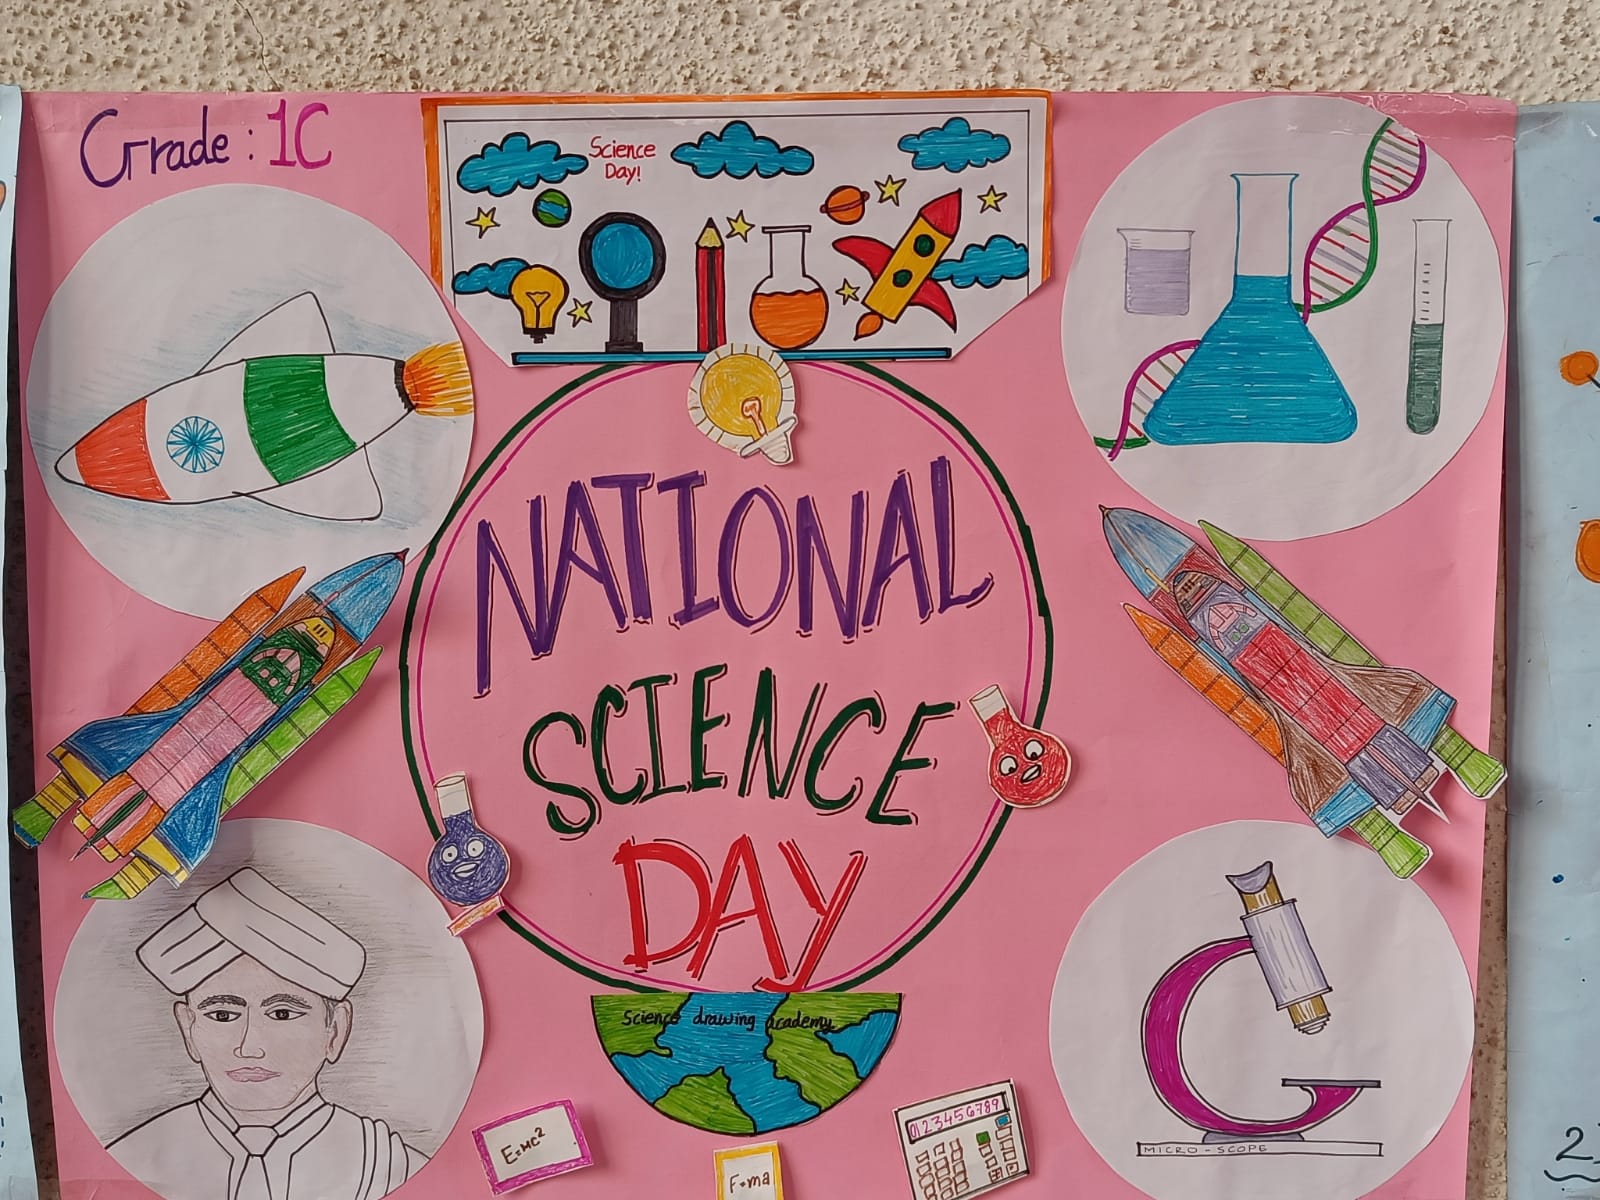 National Science Day Cliparts, Stock Vector and Royalty Free National Science  Day Illustrations